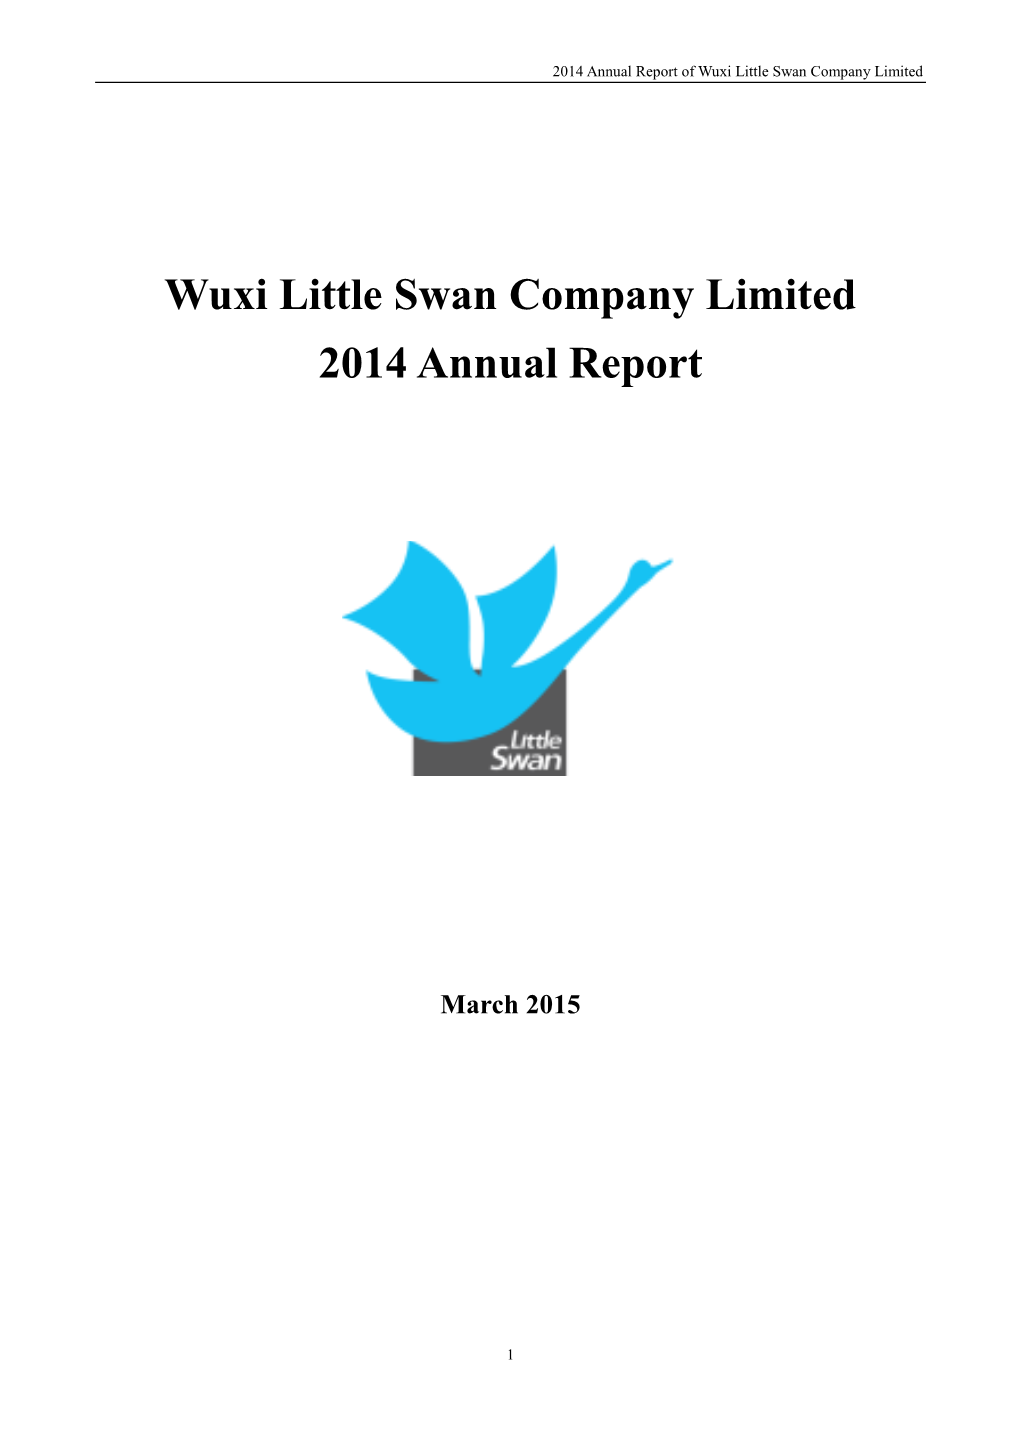 Wuxi Little Swan Company Limited